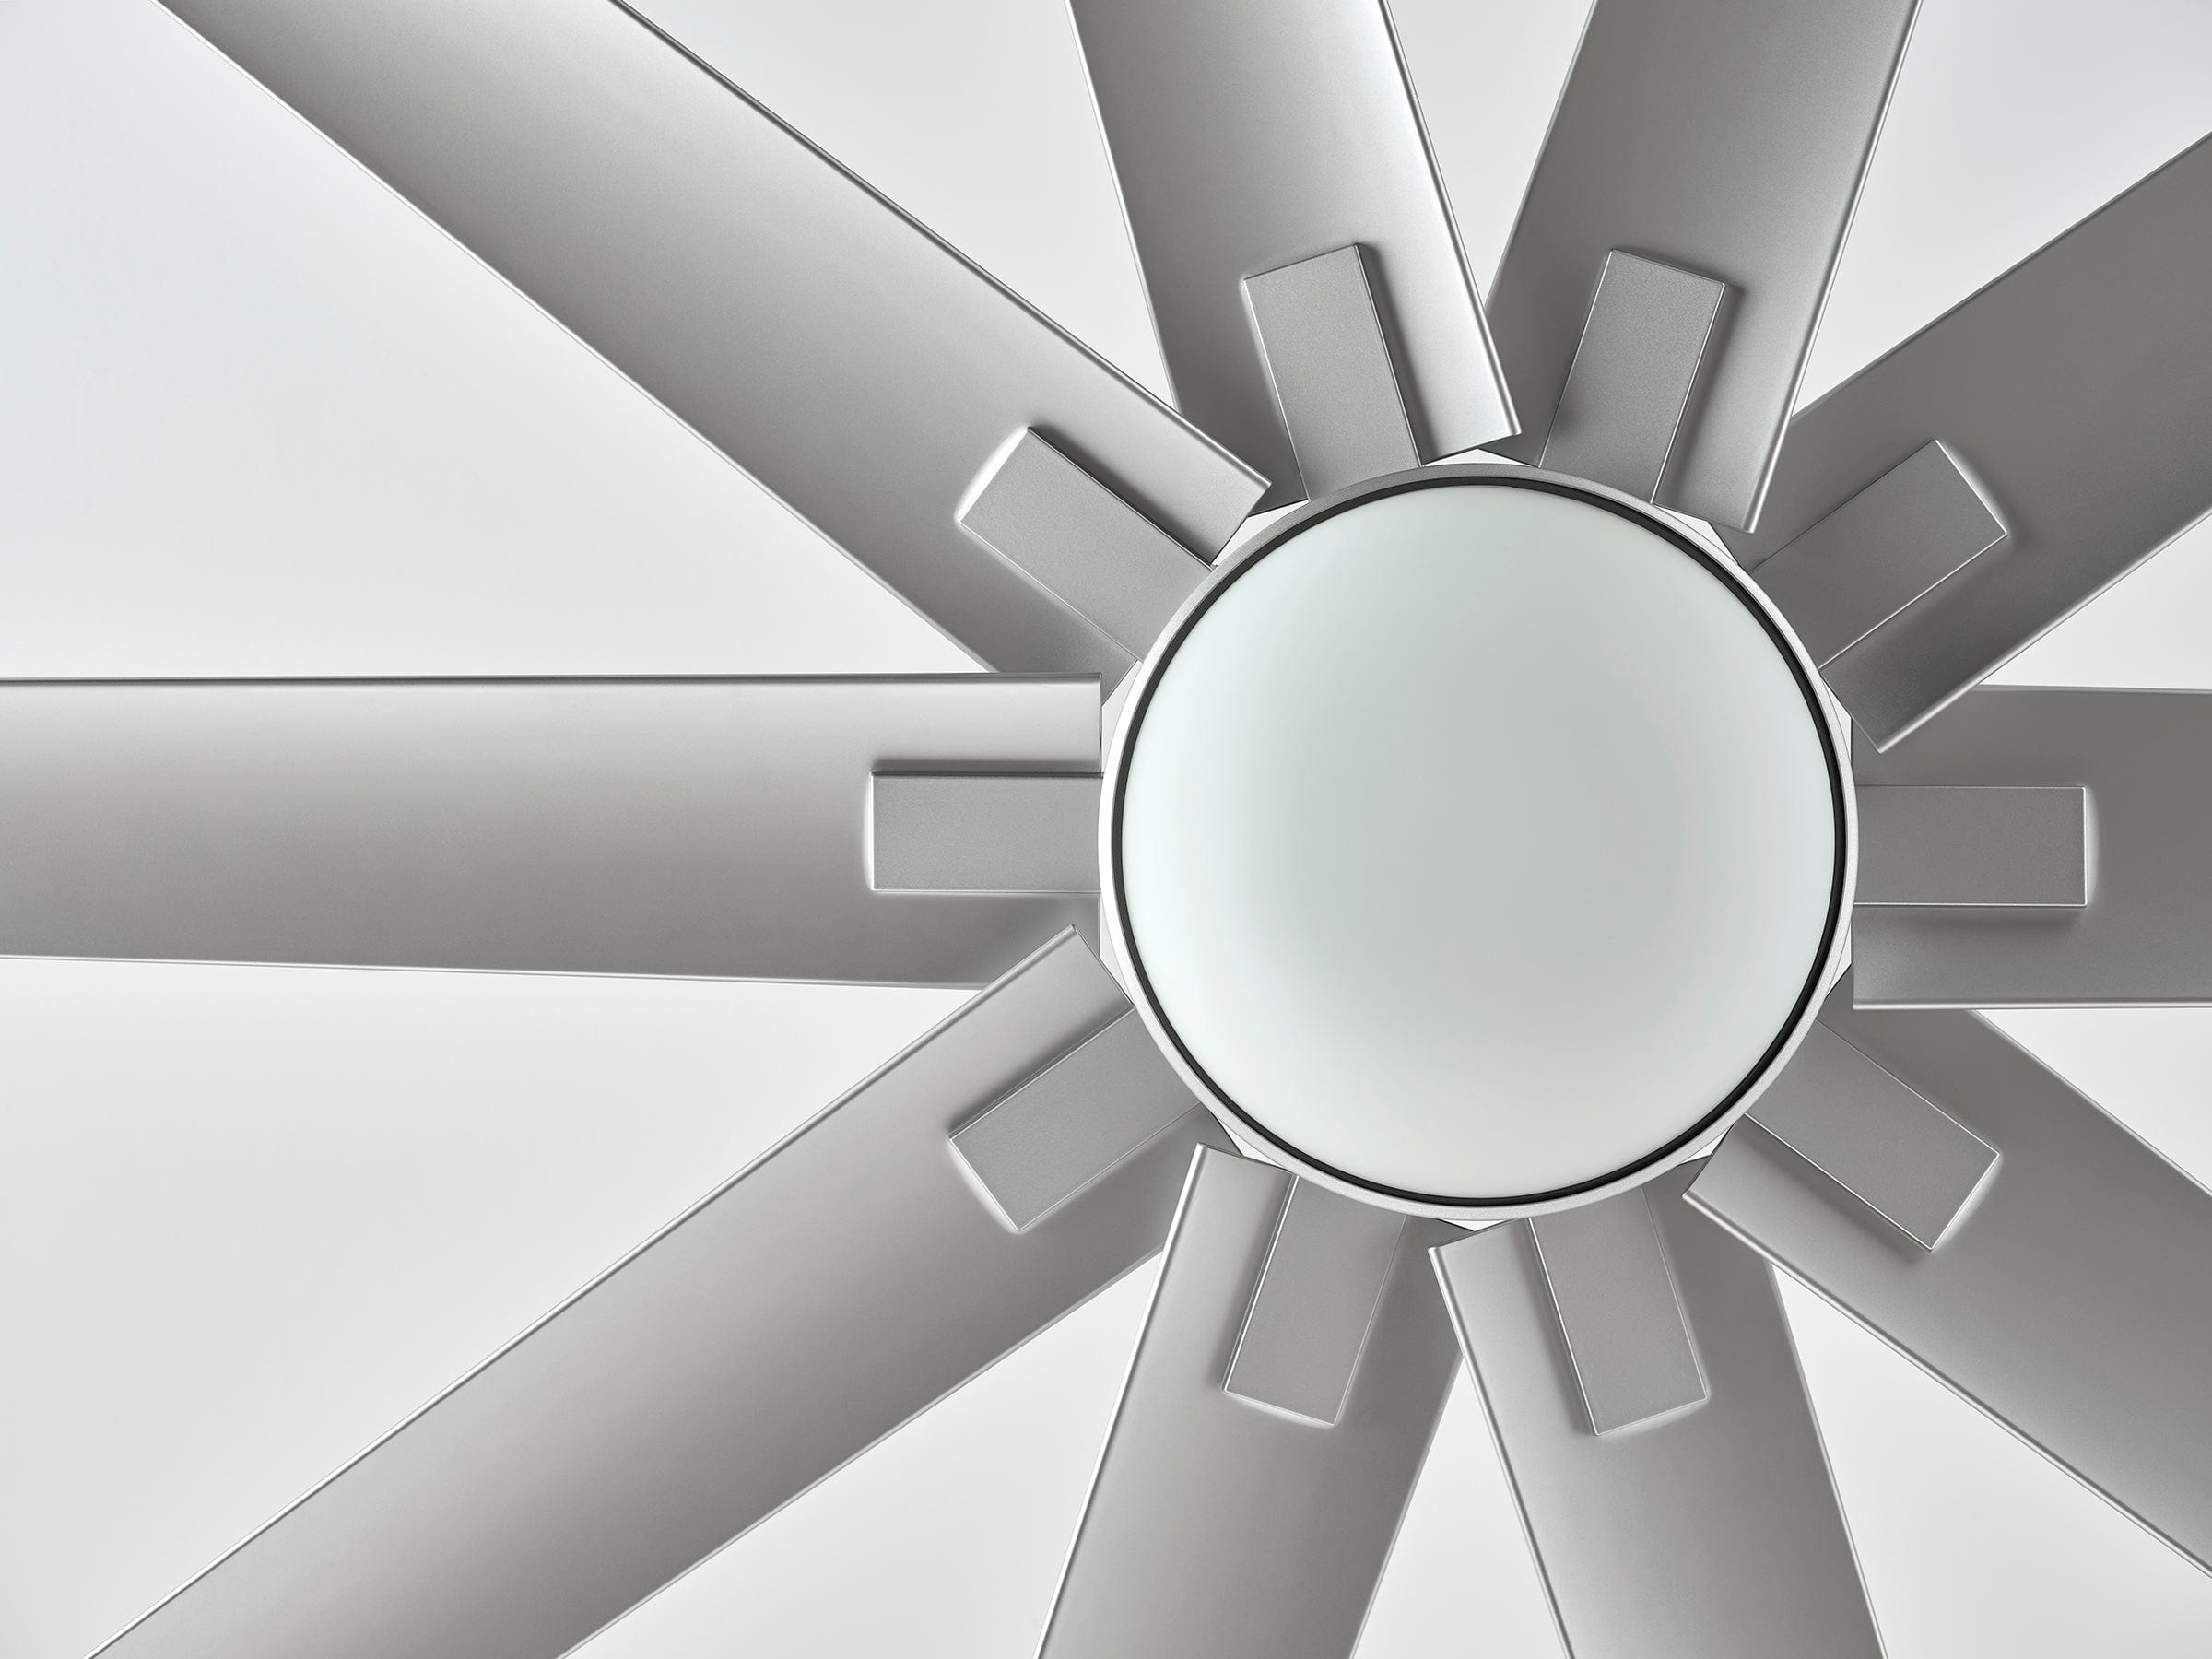 Does the Number of Blades on a Ceiling Fan Matter?